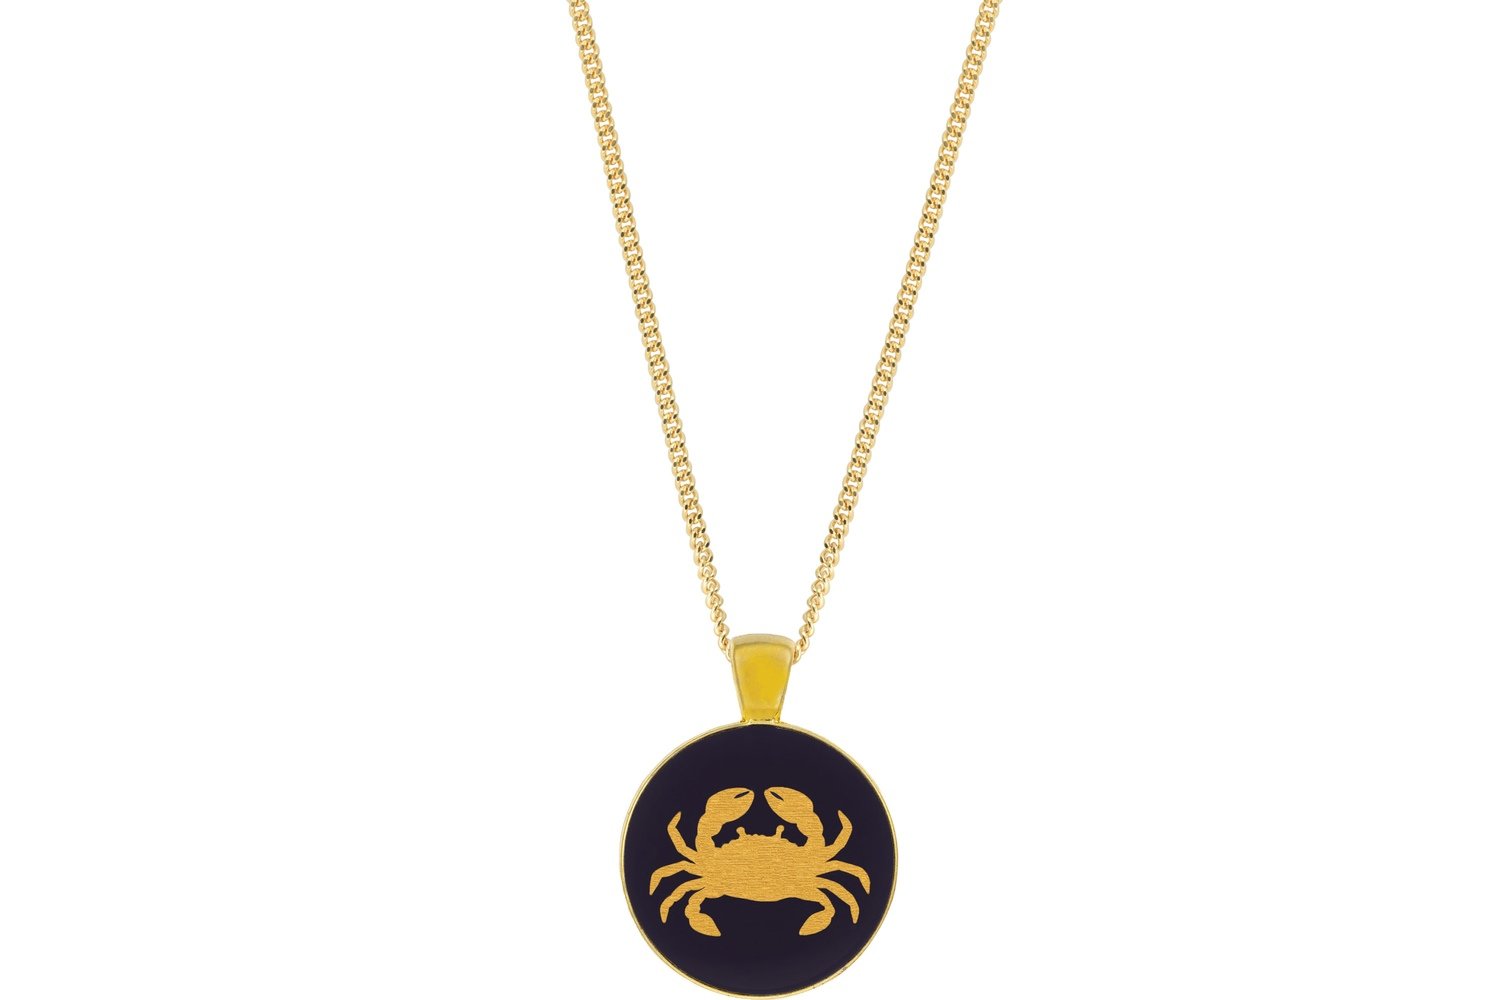 Crab Pendant Classic Style with Bezel on Chain Necklace